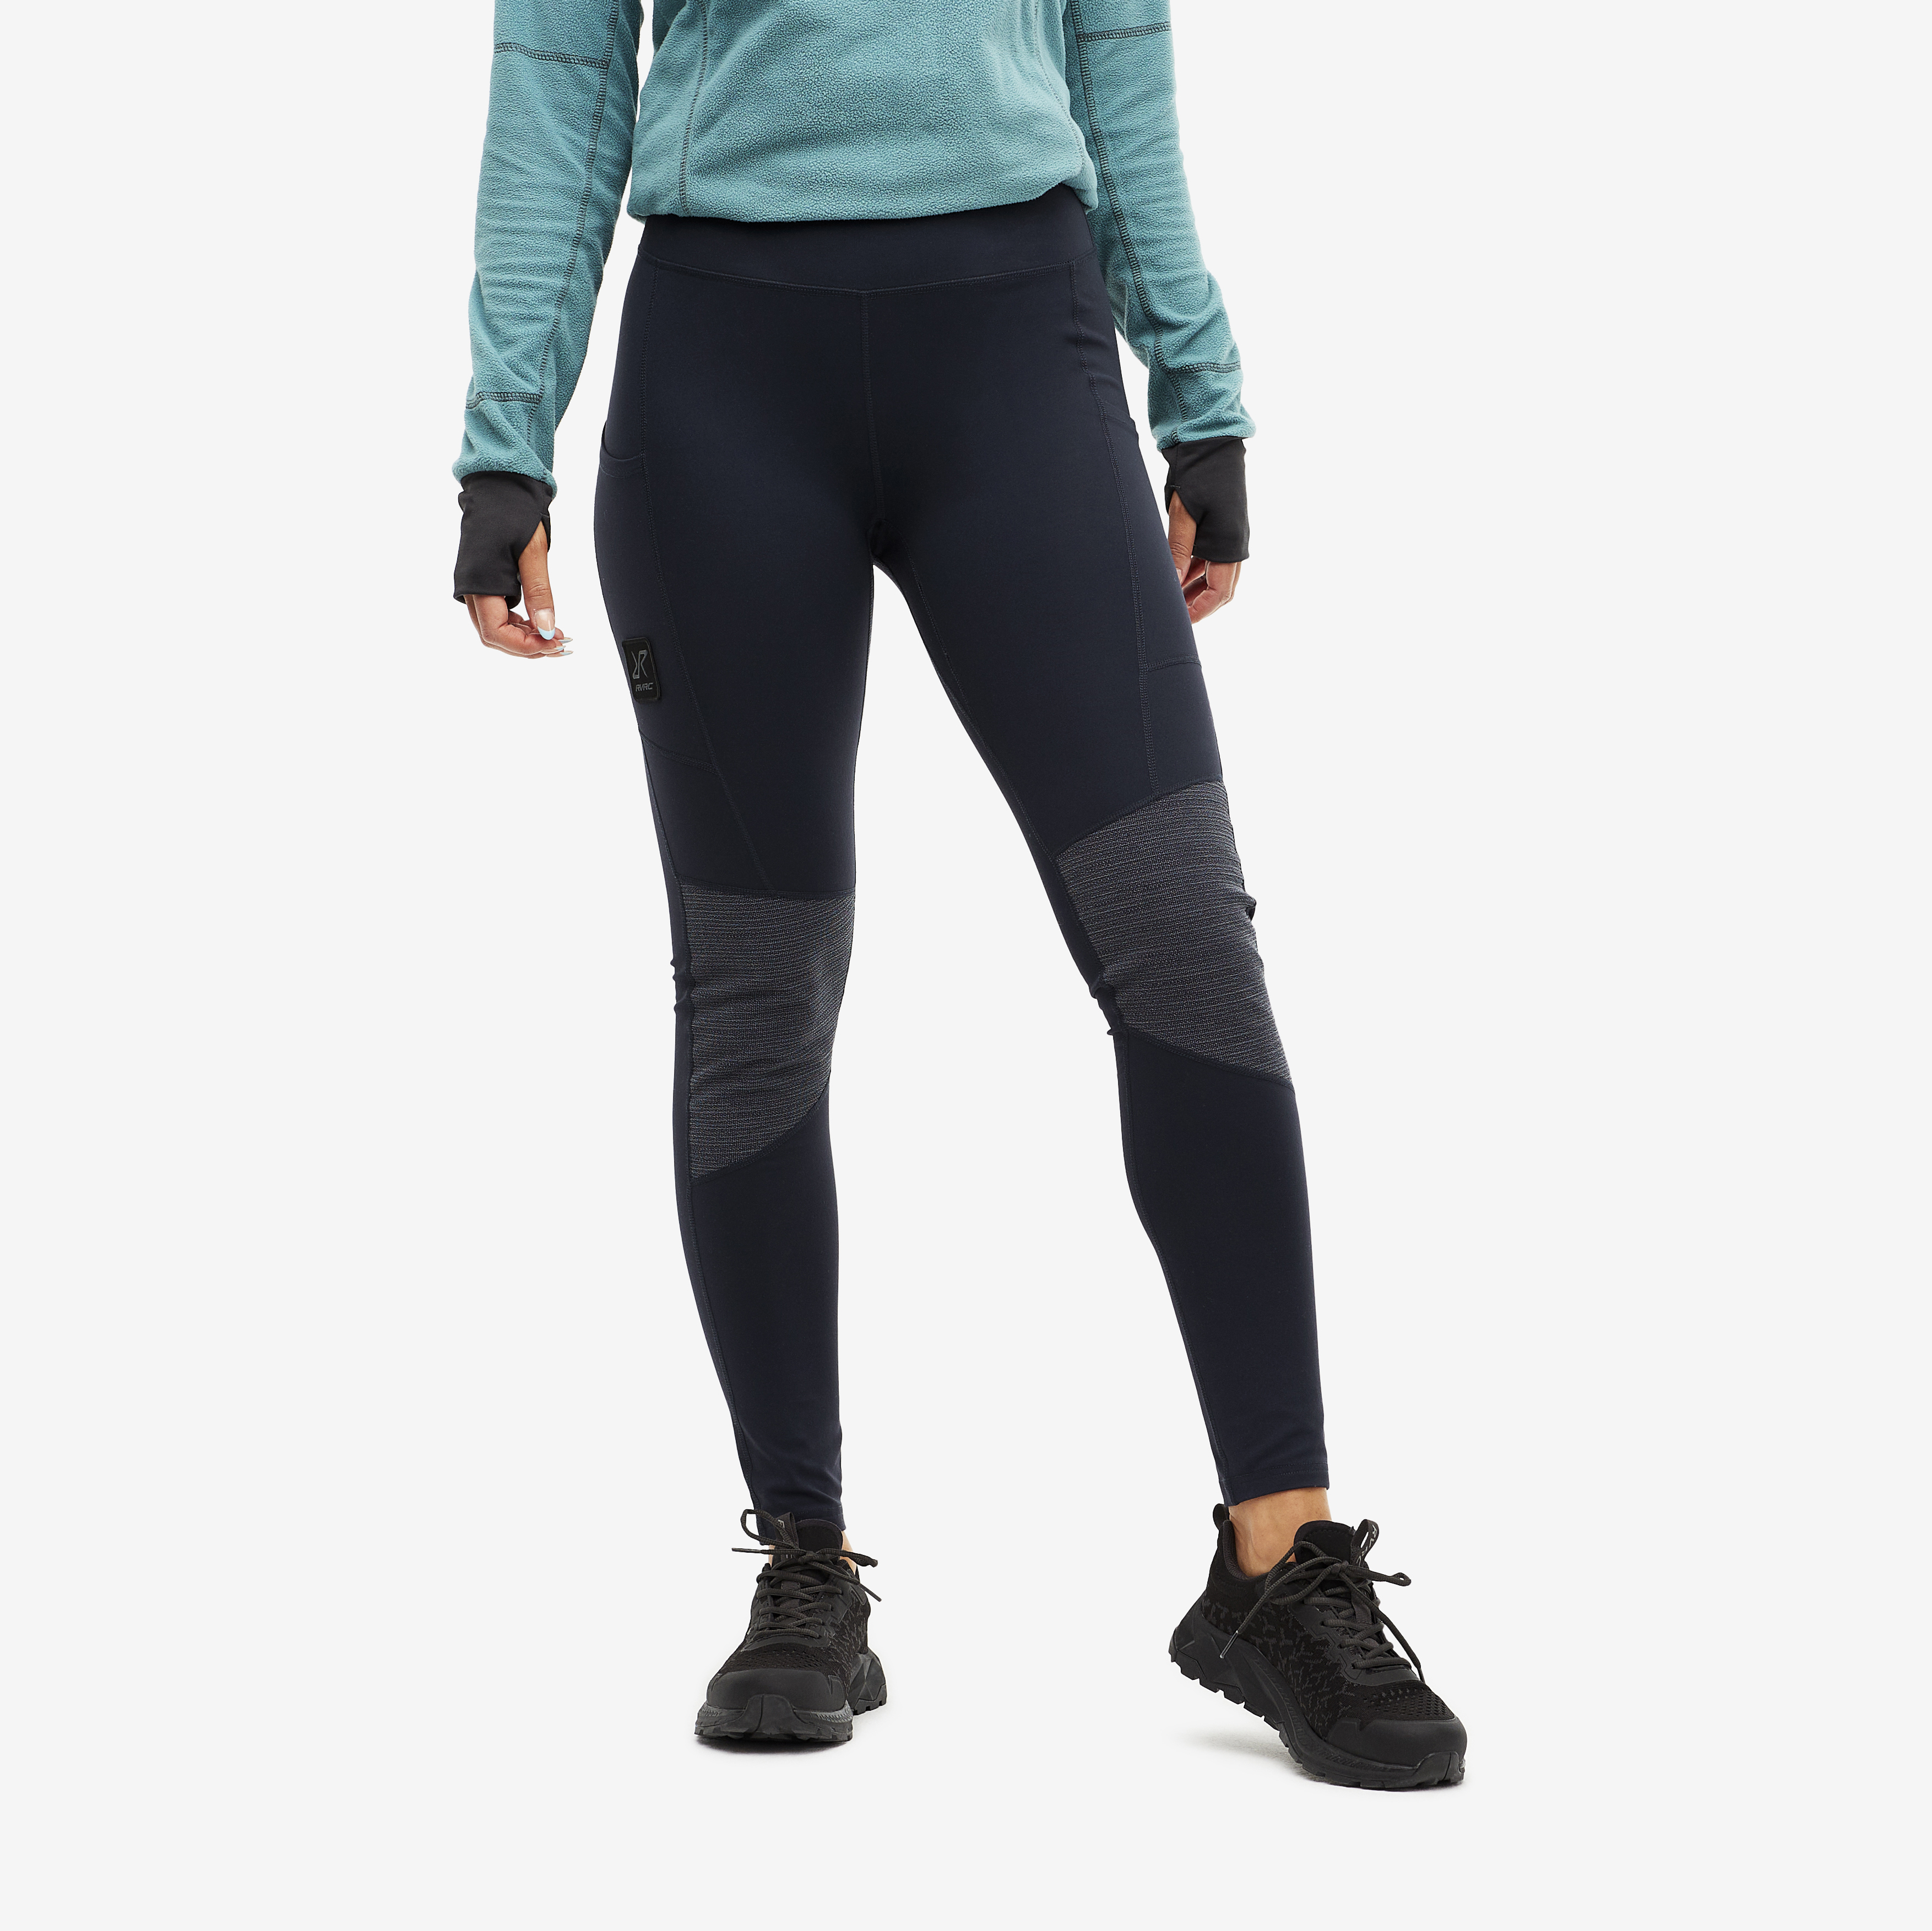 Summit Core Tights - Dam - Peacemaker Blue, Storlek:M - Outdoor Tights